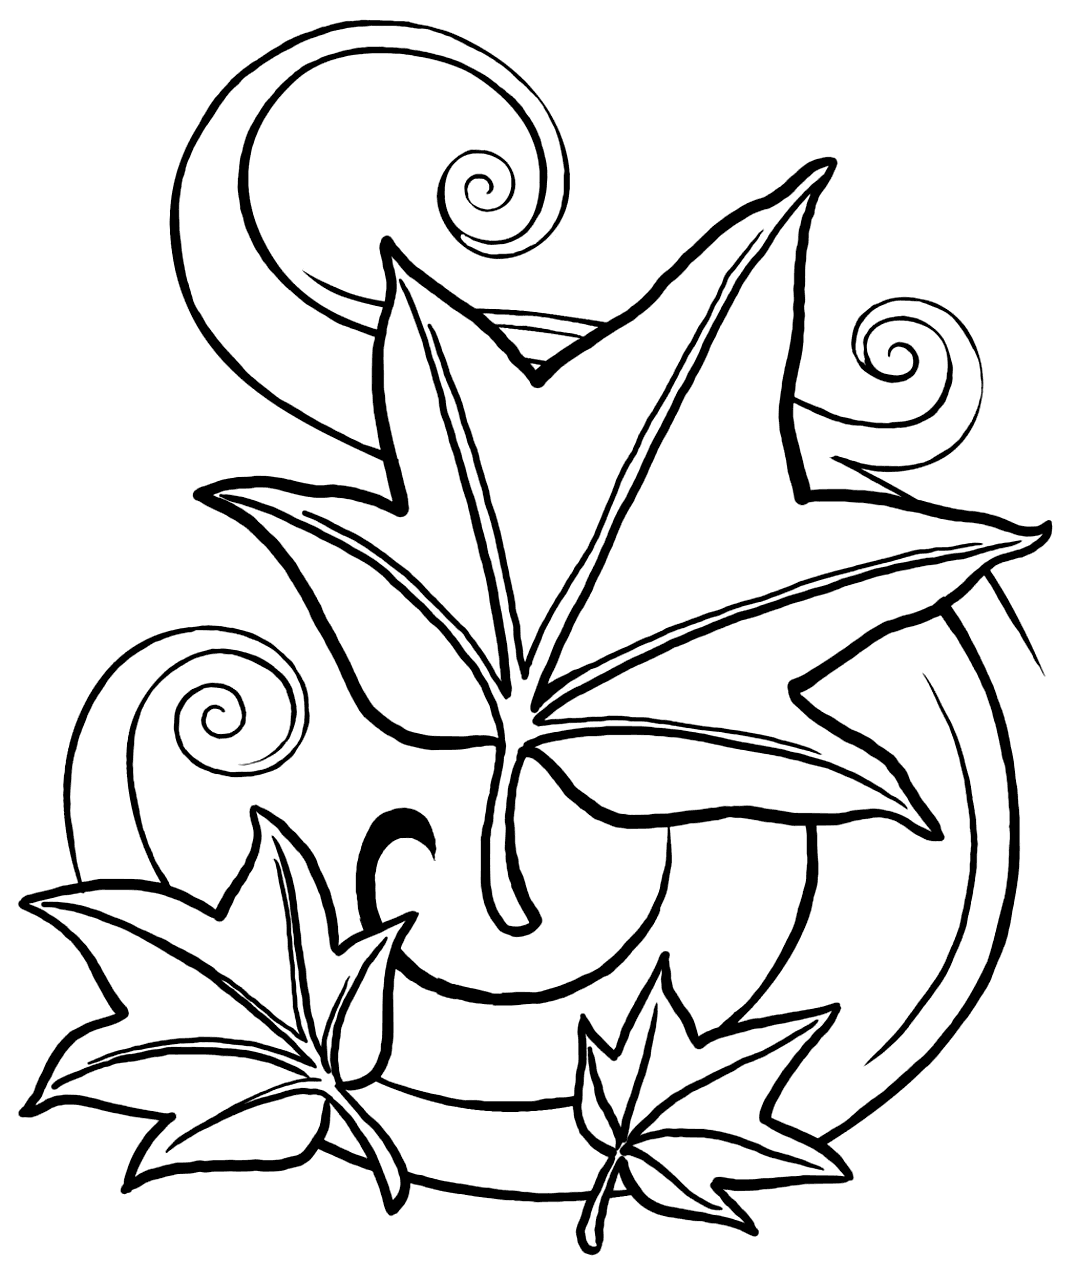 Fall Leaves Blowing Coloring Page